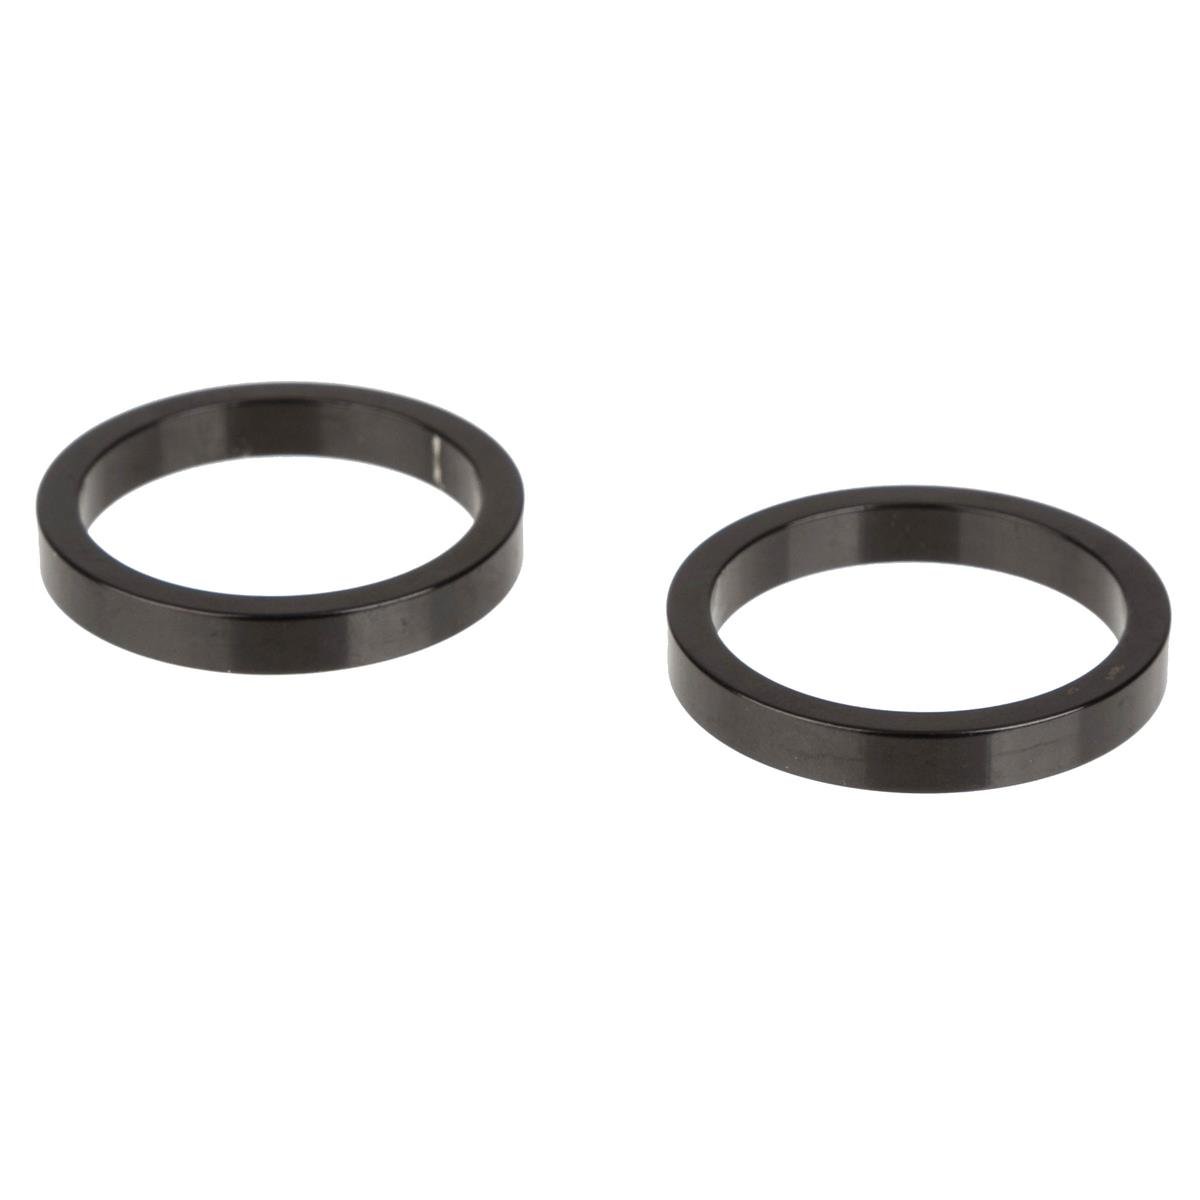 Cane Creek Top Spacer 40 Black, 1 1/8 Inches, 5 mm